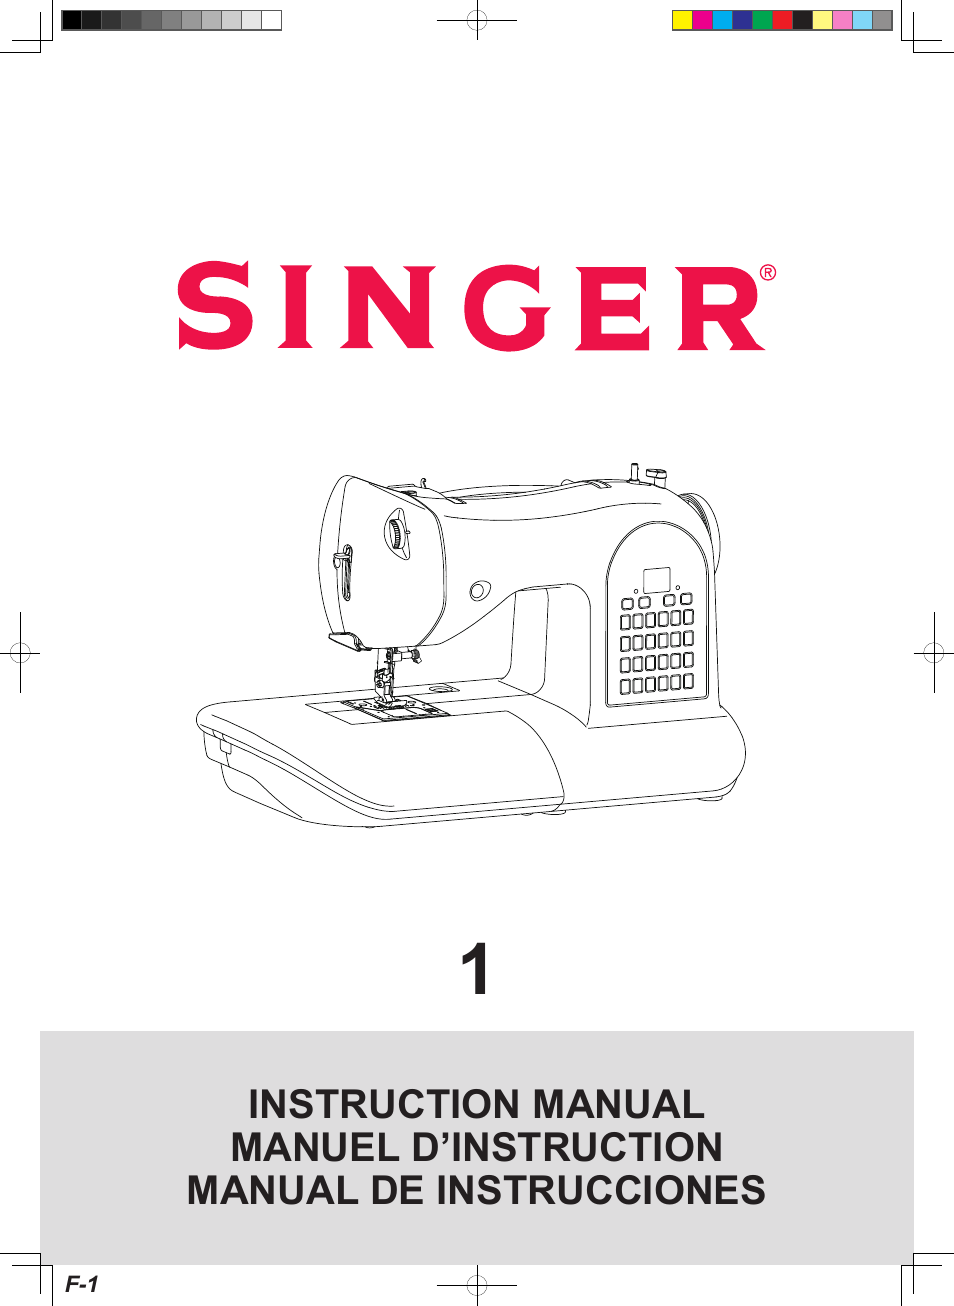 SINGER 1 ONE Instruction Manual User Manual | 60 pages | Also for: 1 ONE